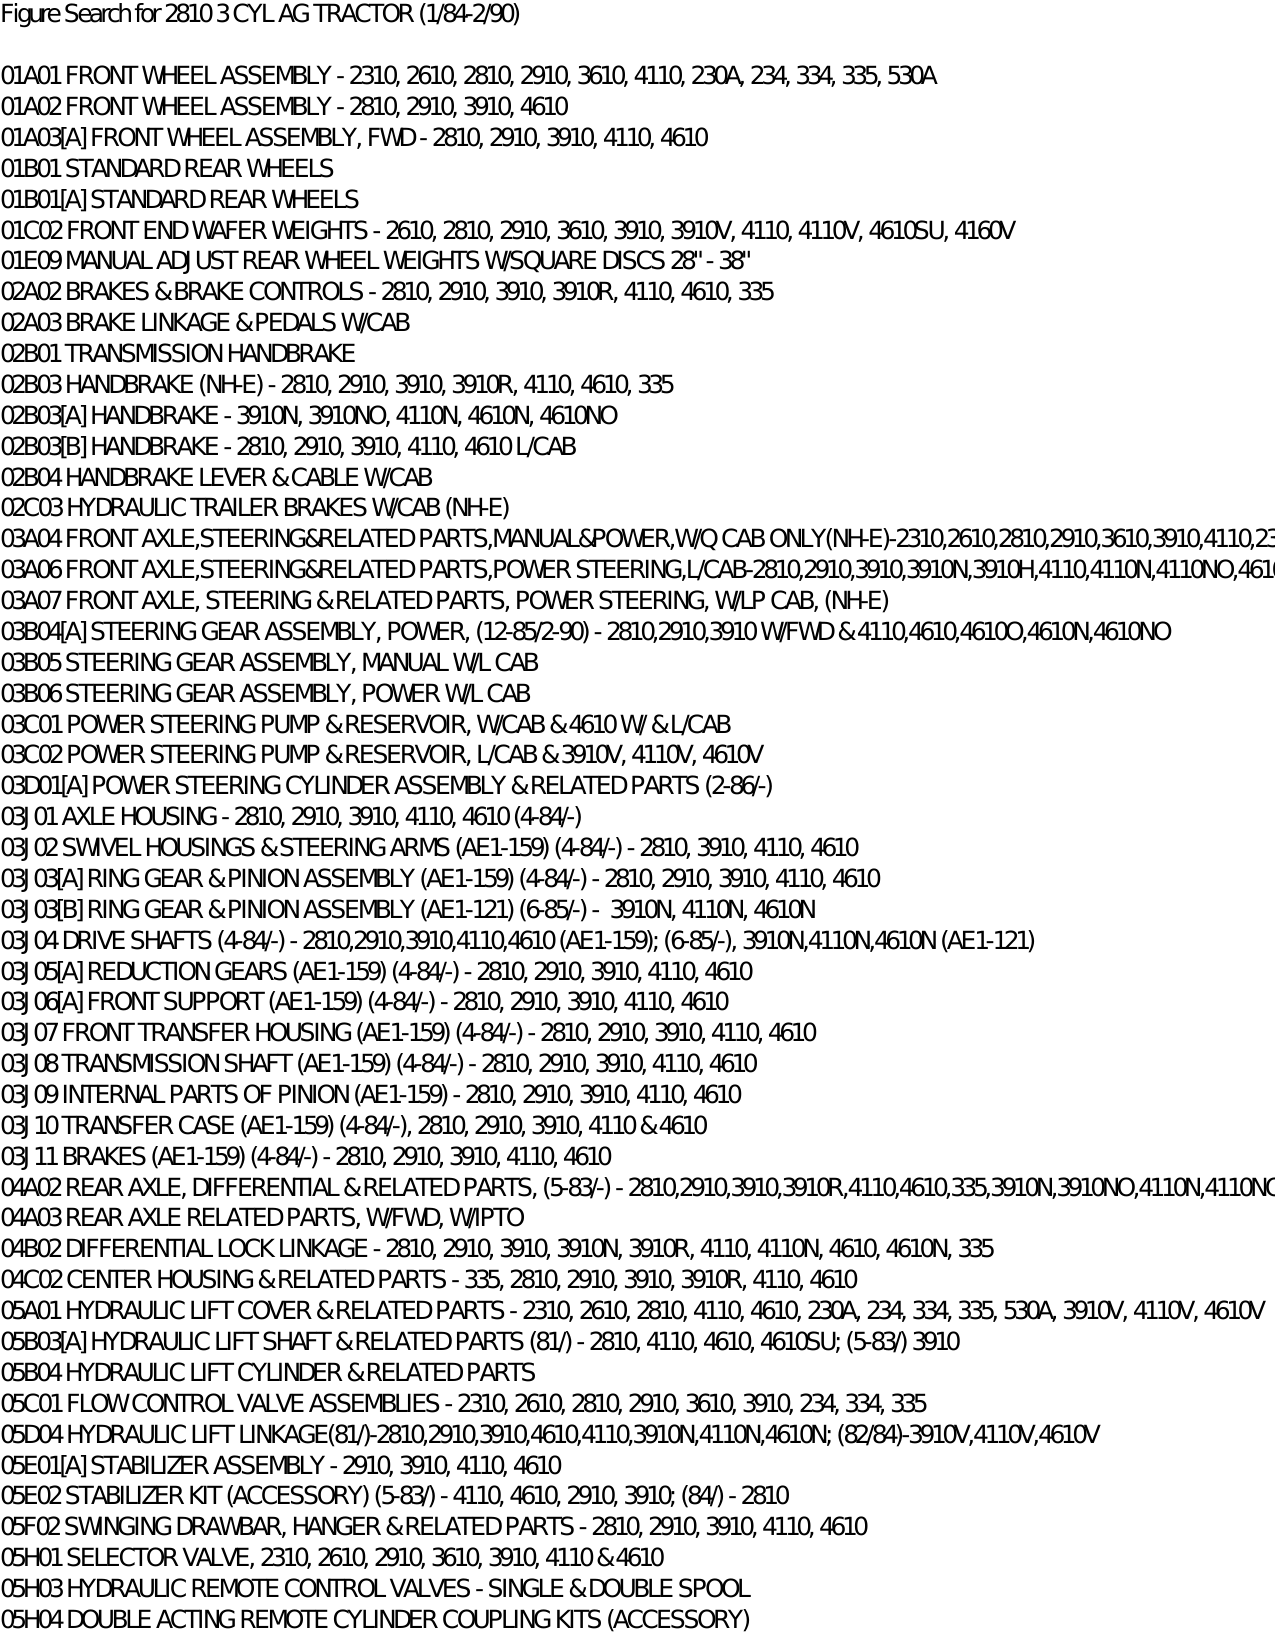 Ford 2810 utility tractor parts list Preview image 3